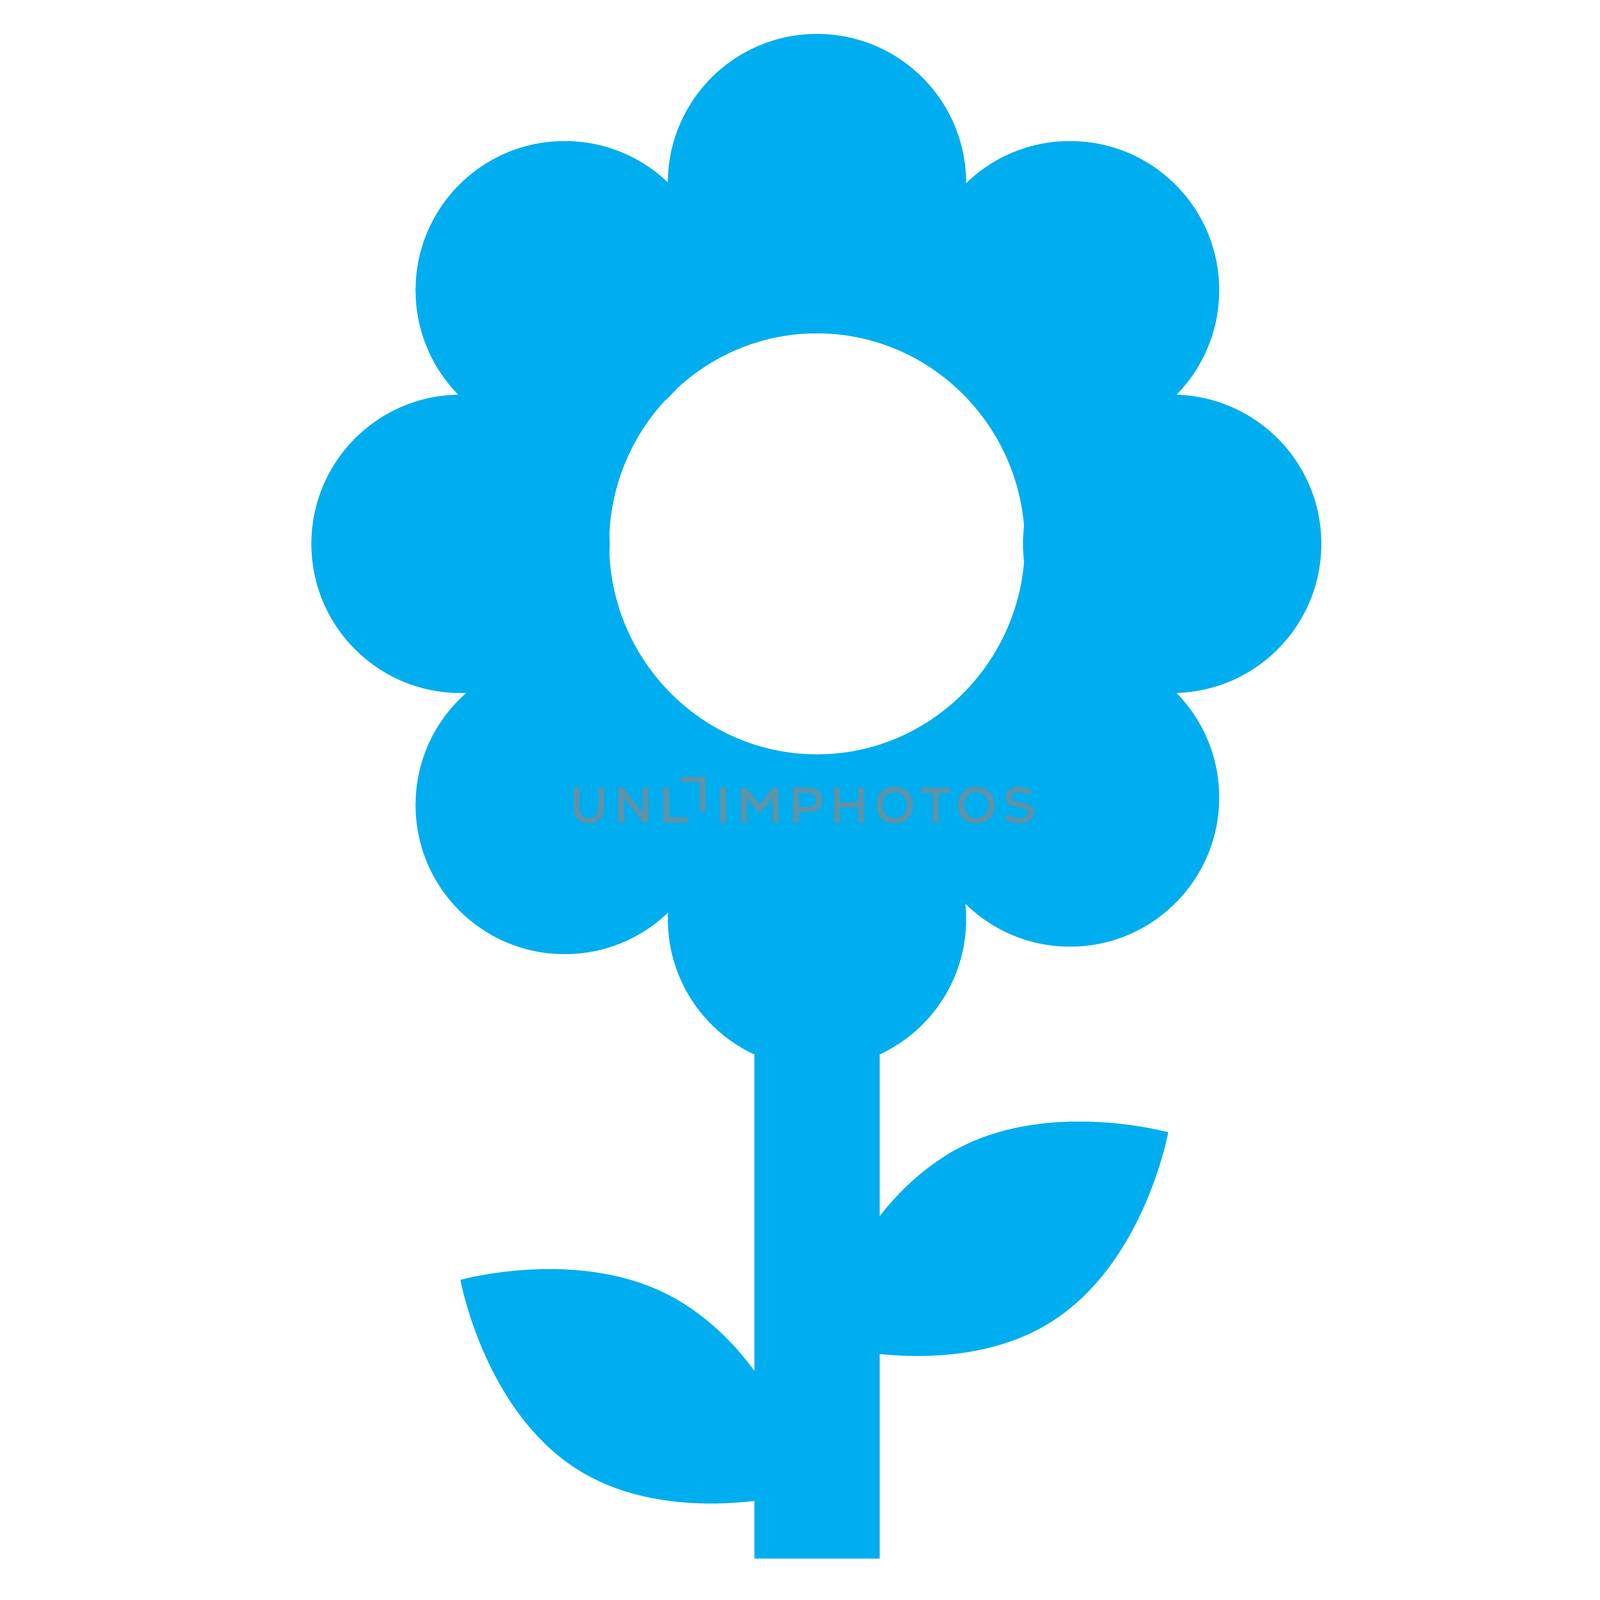 flower icon on white background. flat style. flower sign for you by suthee